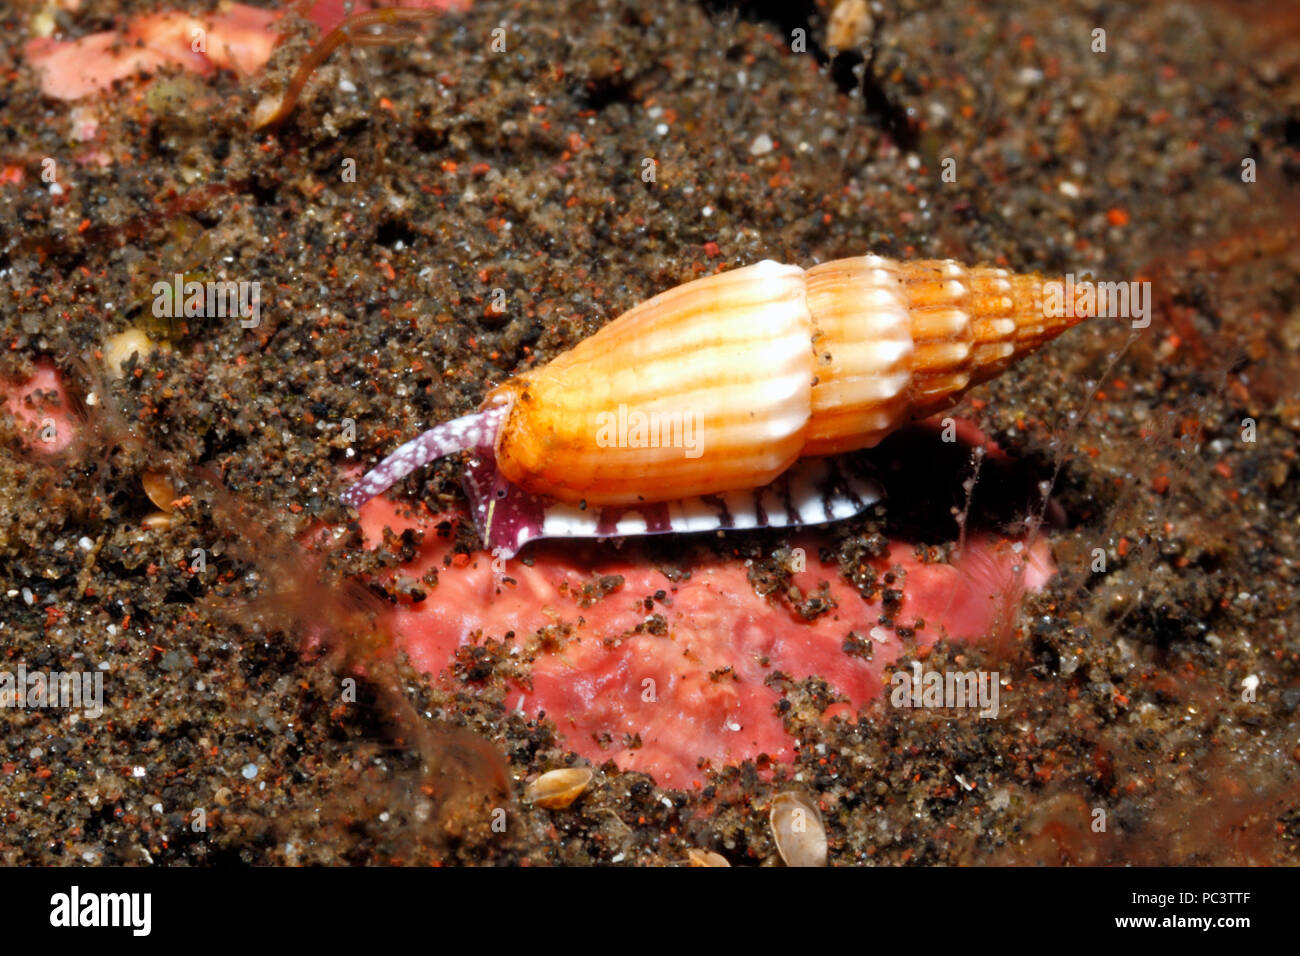 Ribbed Mitre Shell, Vexillum turriger. Alive underwater, showing the foot, syphon and eye.Tulamben, Bali, Indonesia. Bali Sea, Indian Ocean Stock Photo